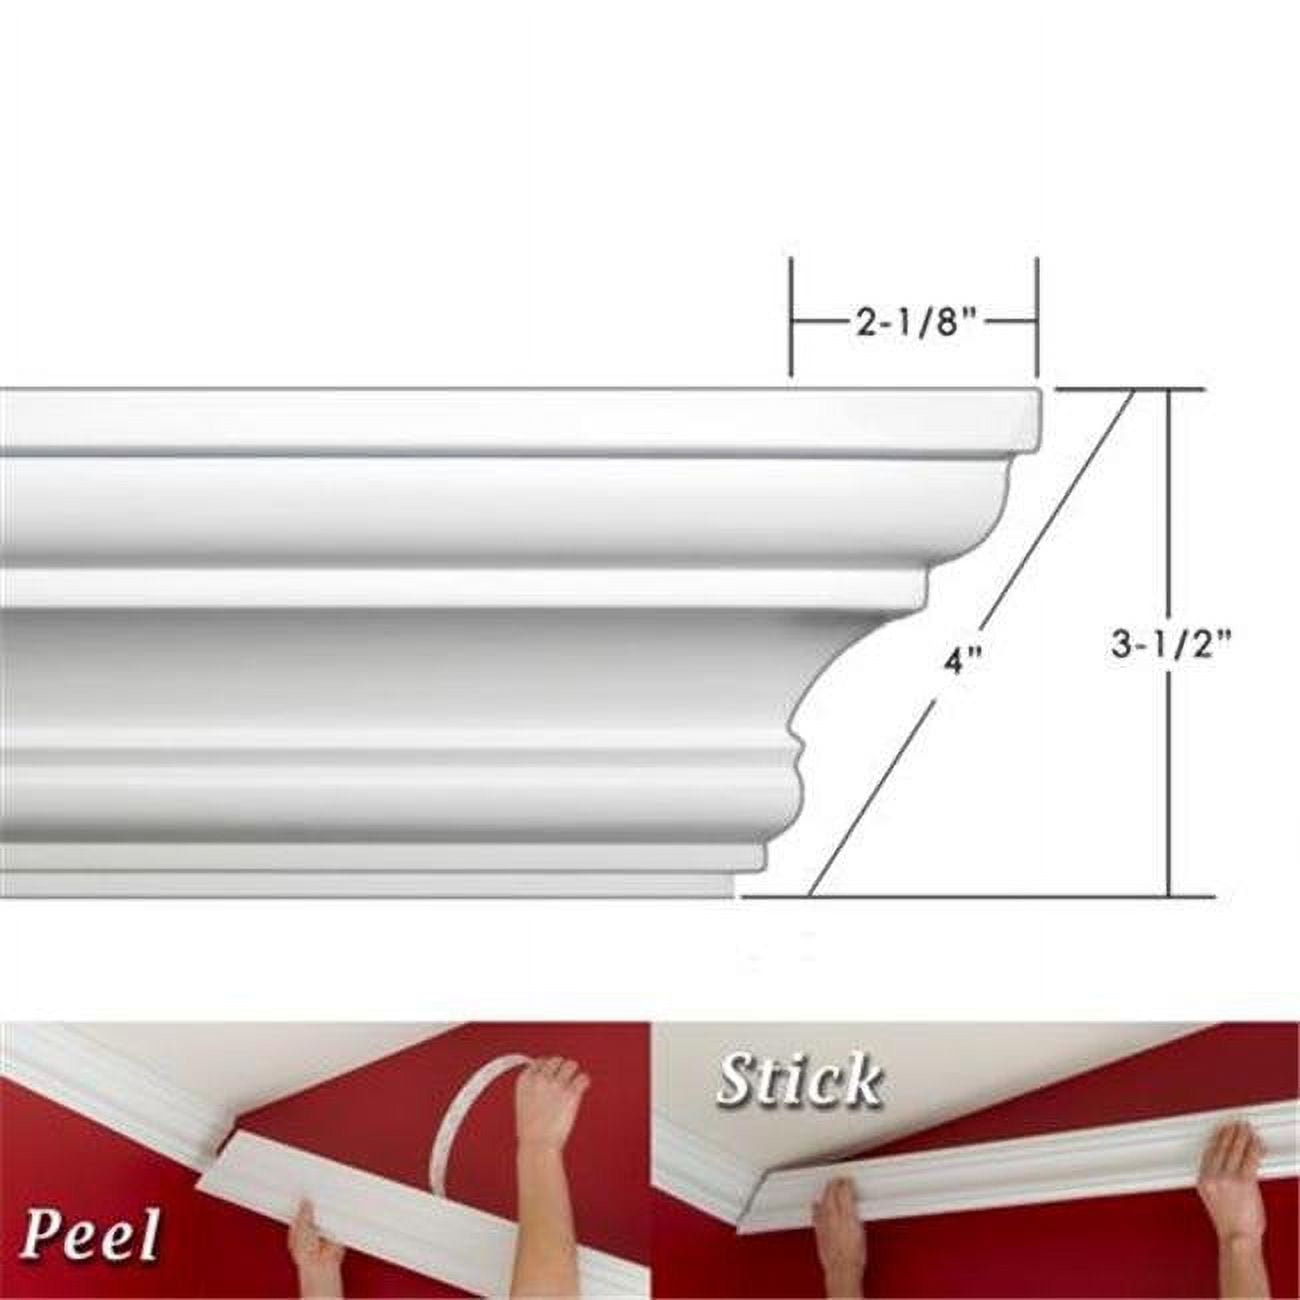 How to Apply Peel and Stick Picture Moulding with Scissors